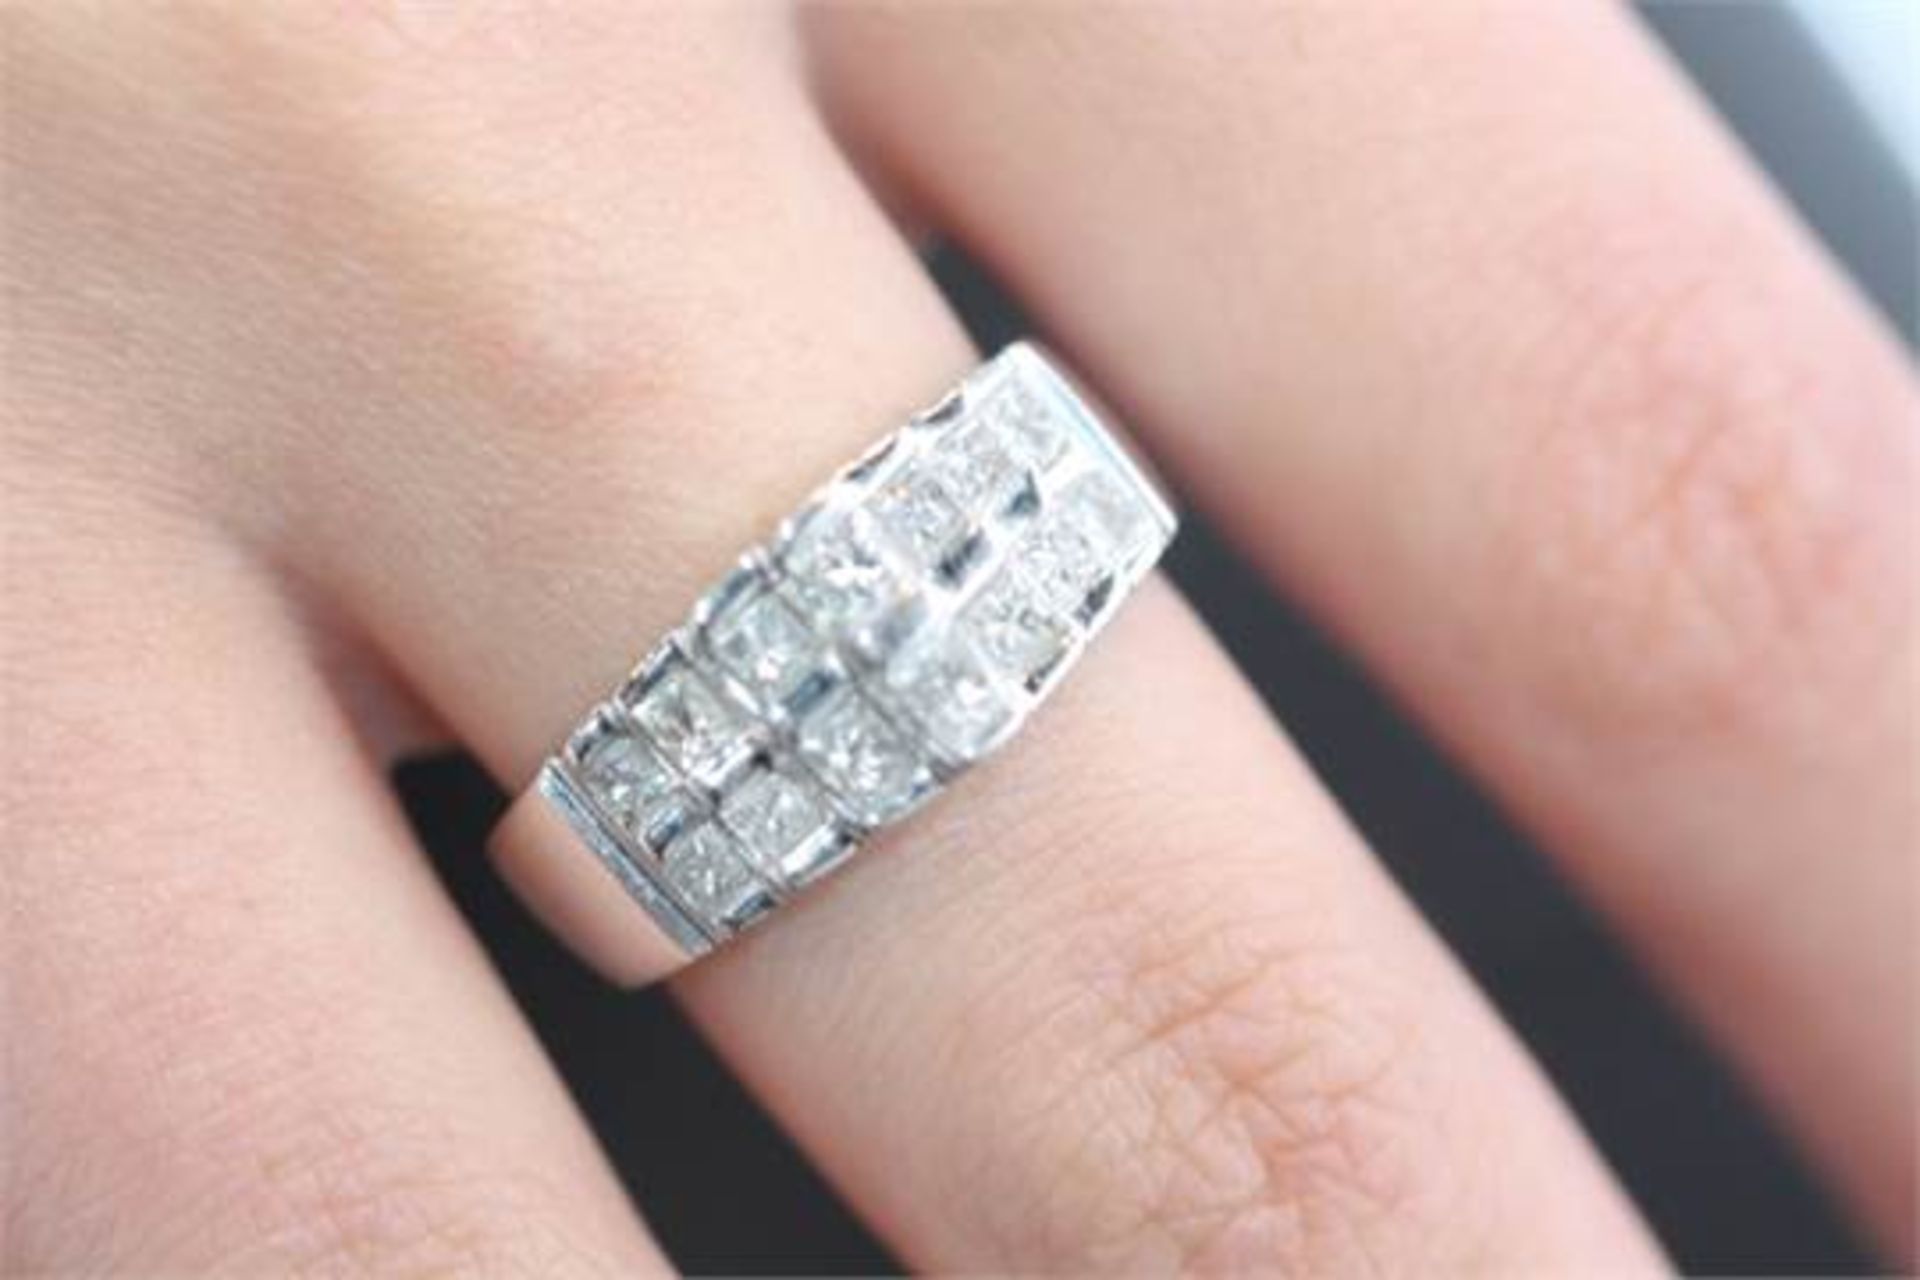 **£2995** BOXED 18K WHITE GOLD UNISEX APPROX 2CT PRINCESS CUT DIAMOND RING, STONES VERY BRIGHT AND